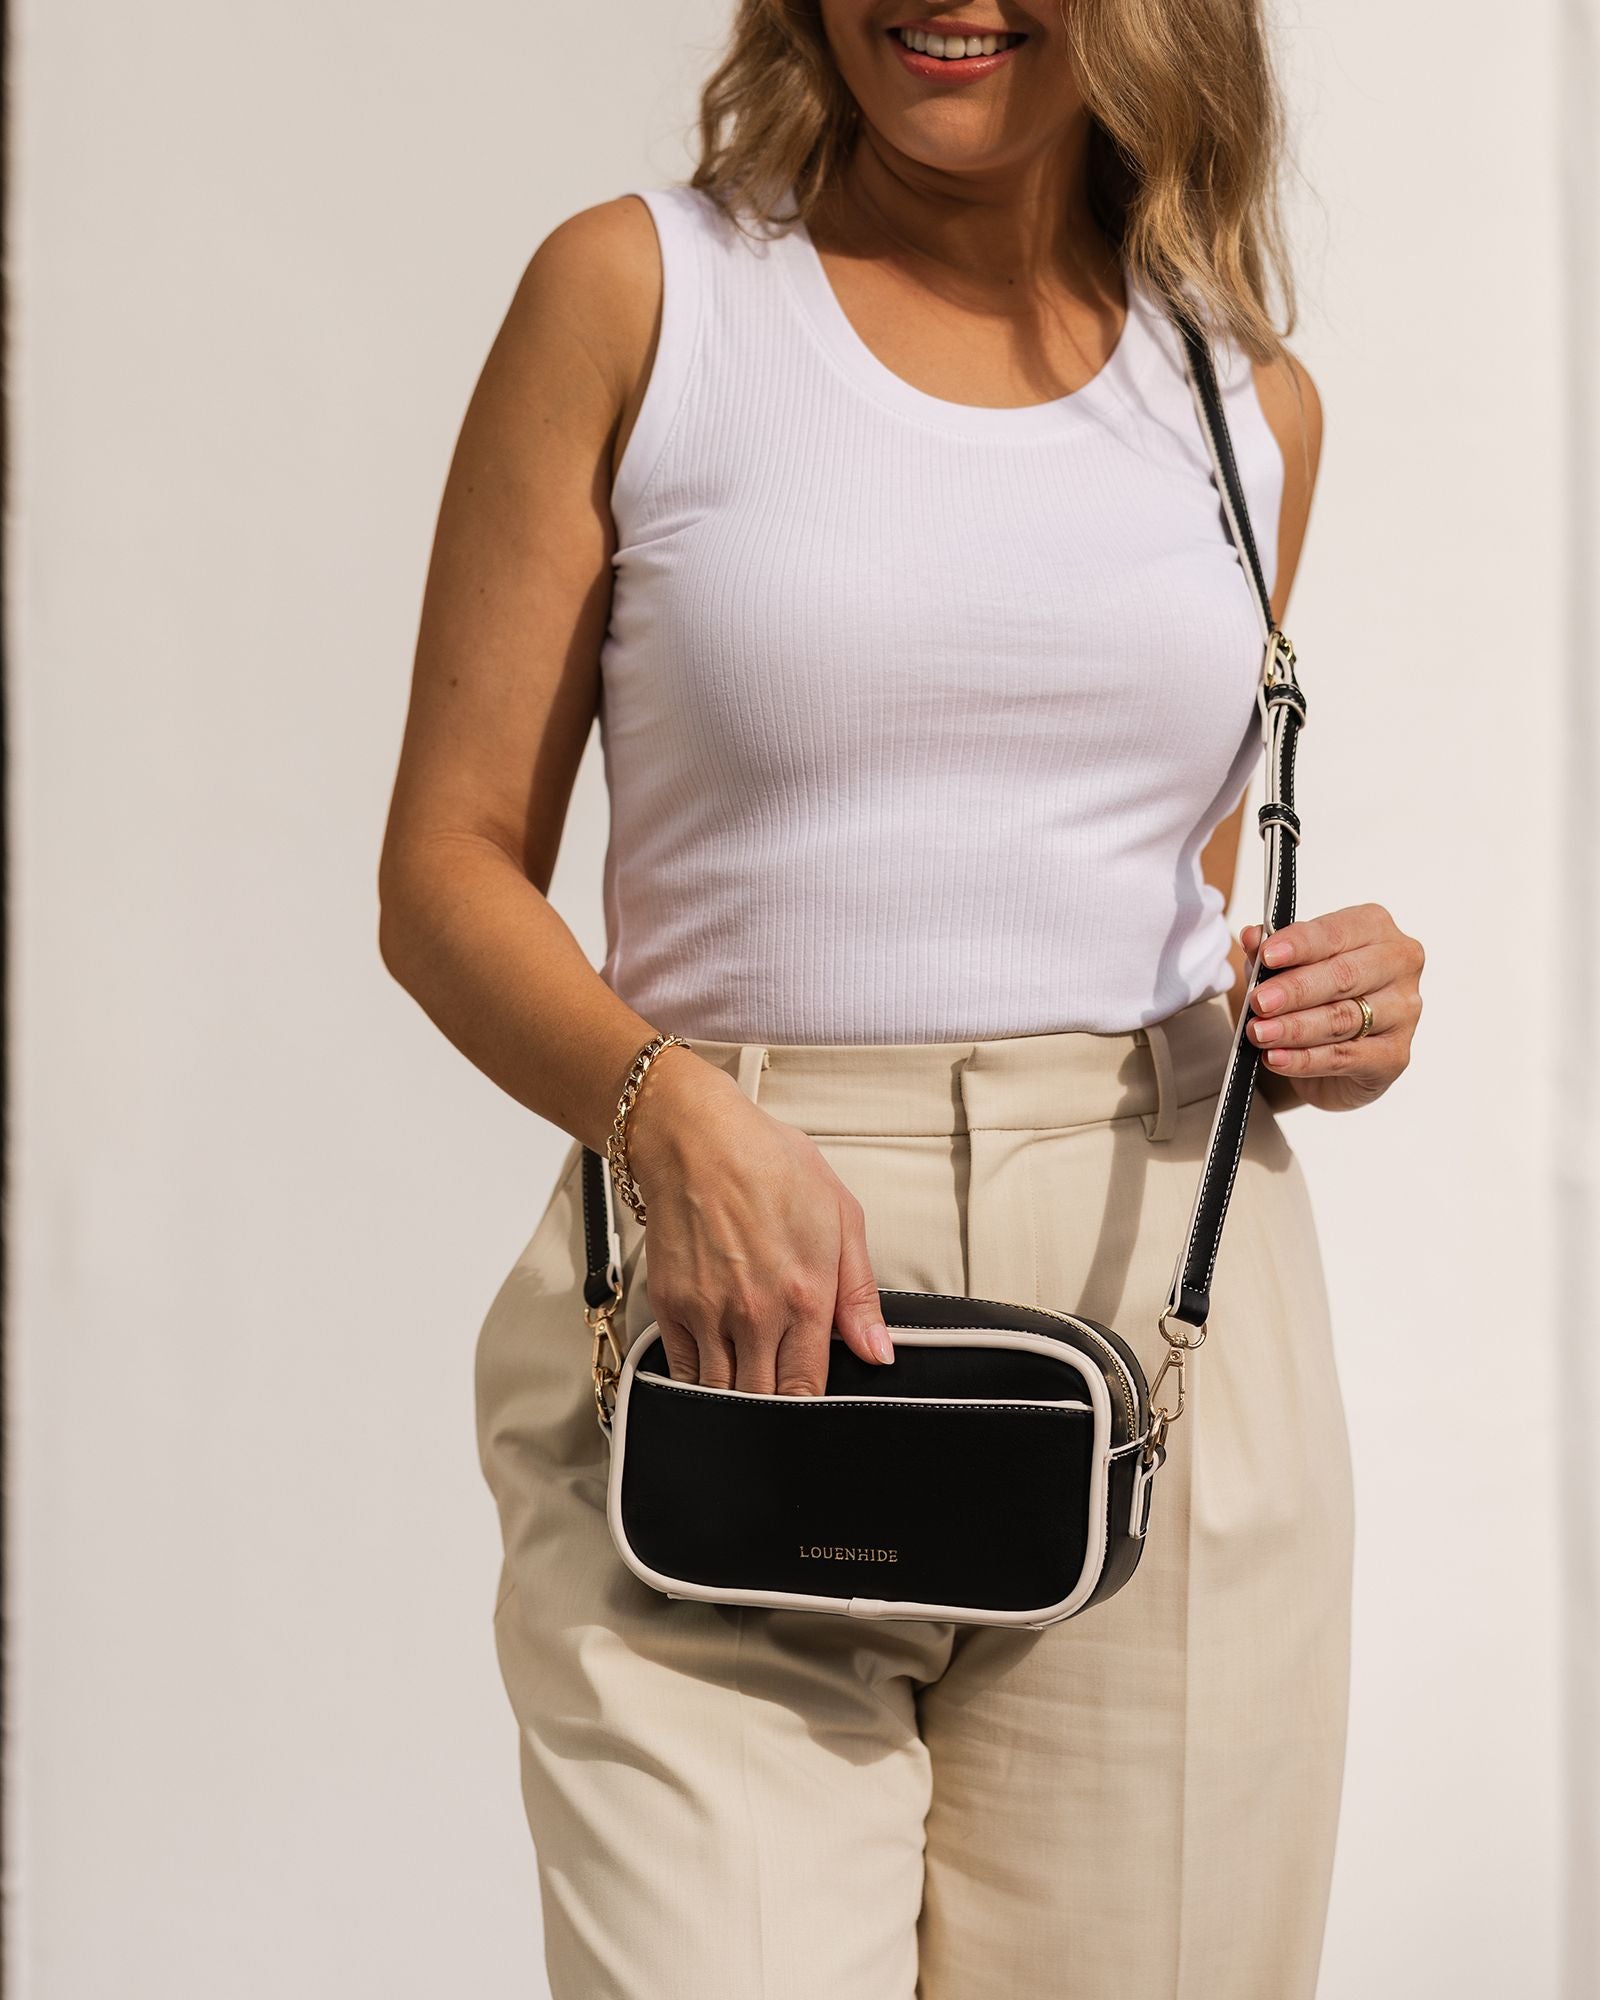 The Louenhide Xanadu Crossbody Bag is the ultimate cool girl accessory for summer. With white contrast trimming, this new camera bag styles is a fun way to embrace the season with a burst of brightness! Allowing you to completely customise your look, the Xanadu features two ways to wear. Simply attach the adjustable vegan leather strap to complement your everyday style or interchange the shorter shoulder strap with light gold chain detailing to elevate your evening attire.